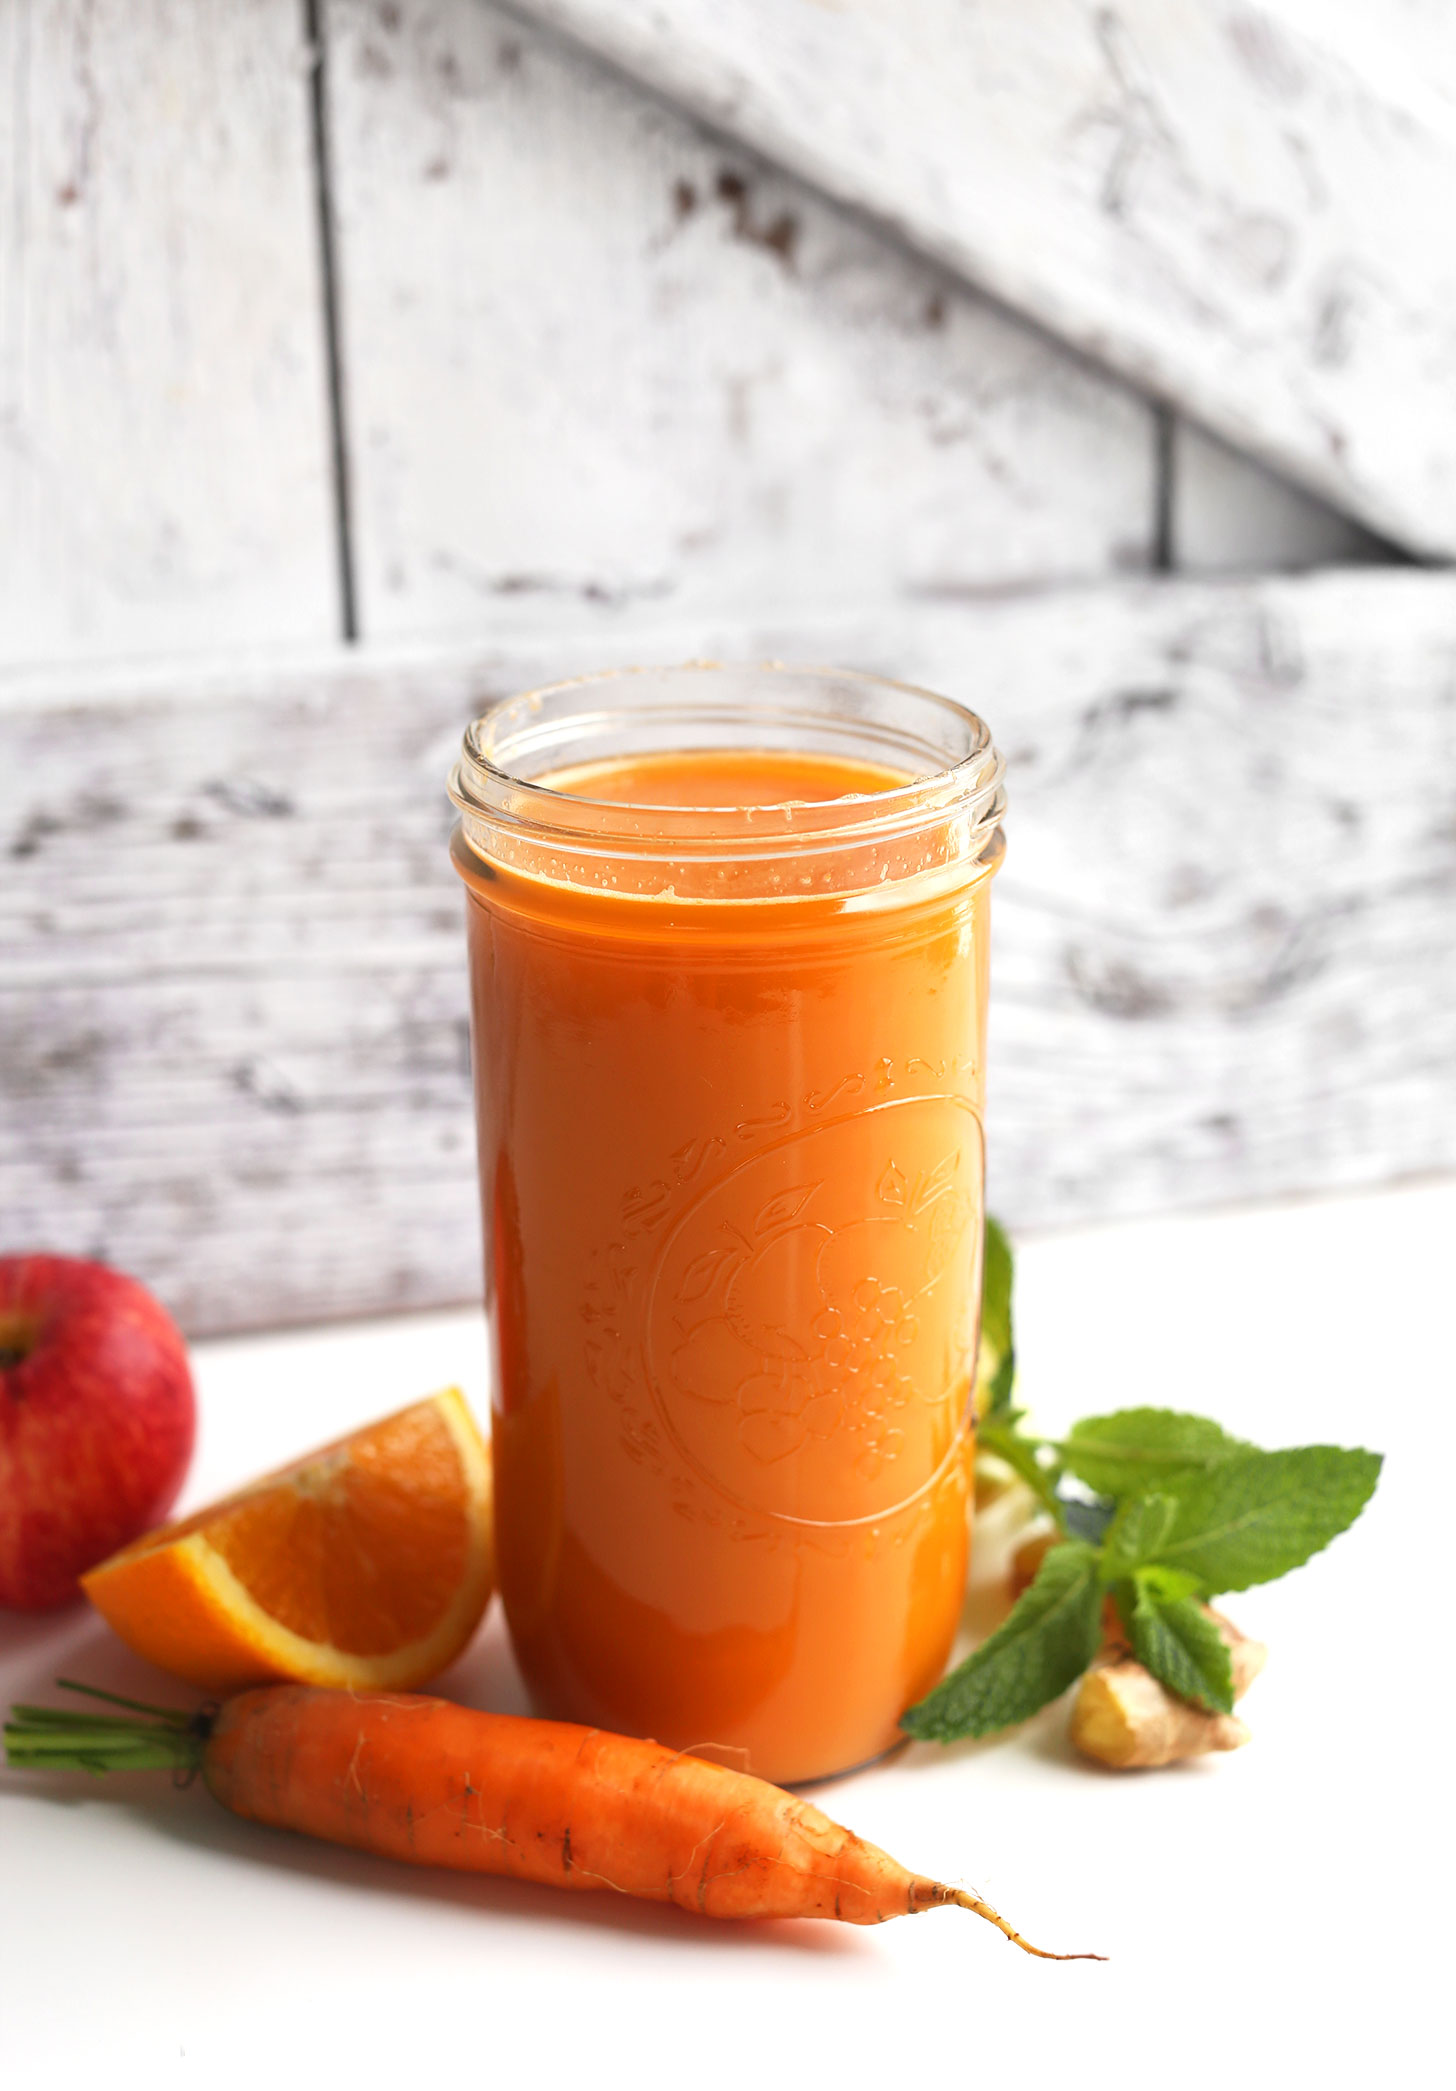 AAMZING-Carrot-Apple-Nectarine-Ginger-Lemon-Juice-Packed-with-vitamins-and-minerals-and-SO-tasty-vegan-glutenfree-carrot-juice-recipe-minimalistbaker.jpg